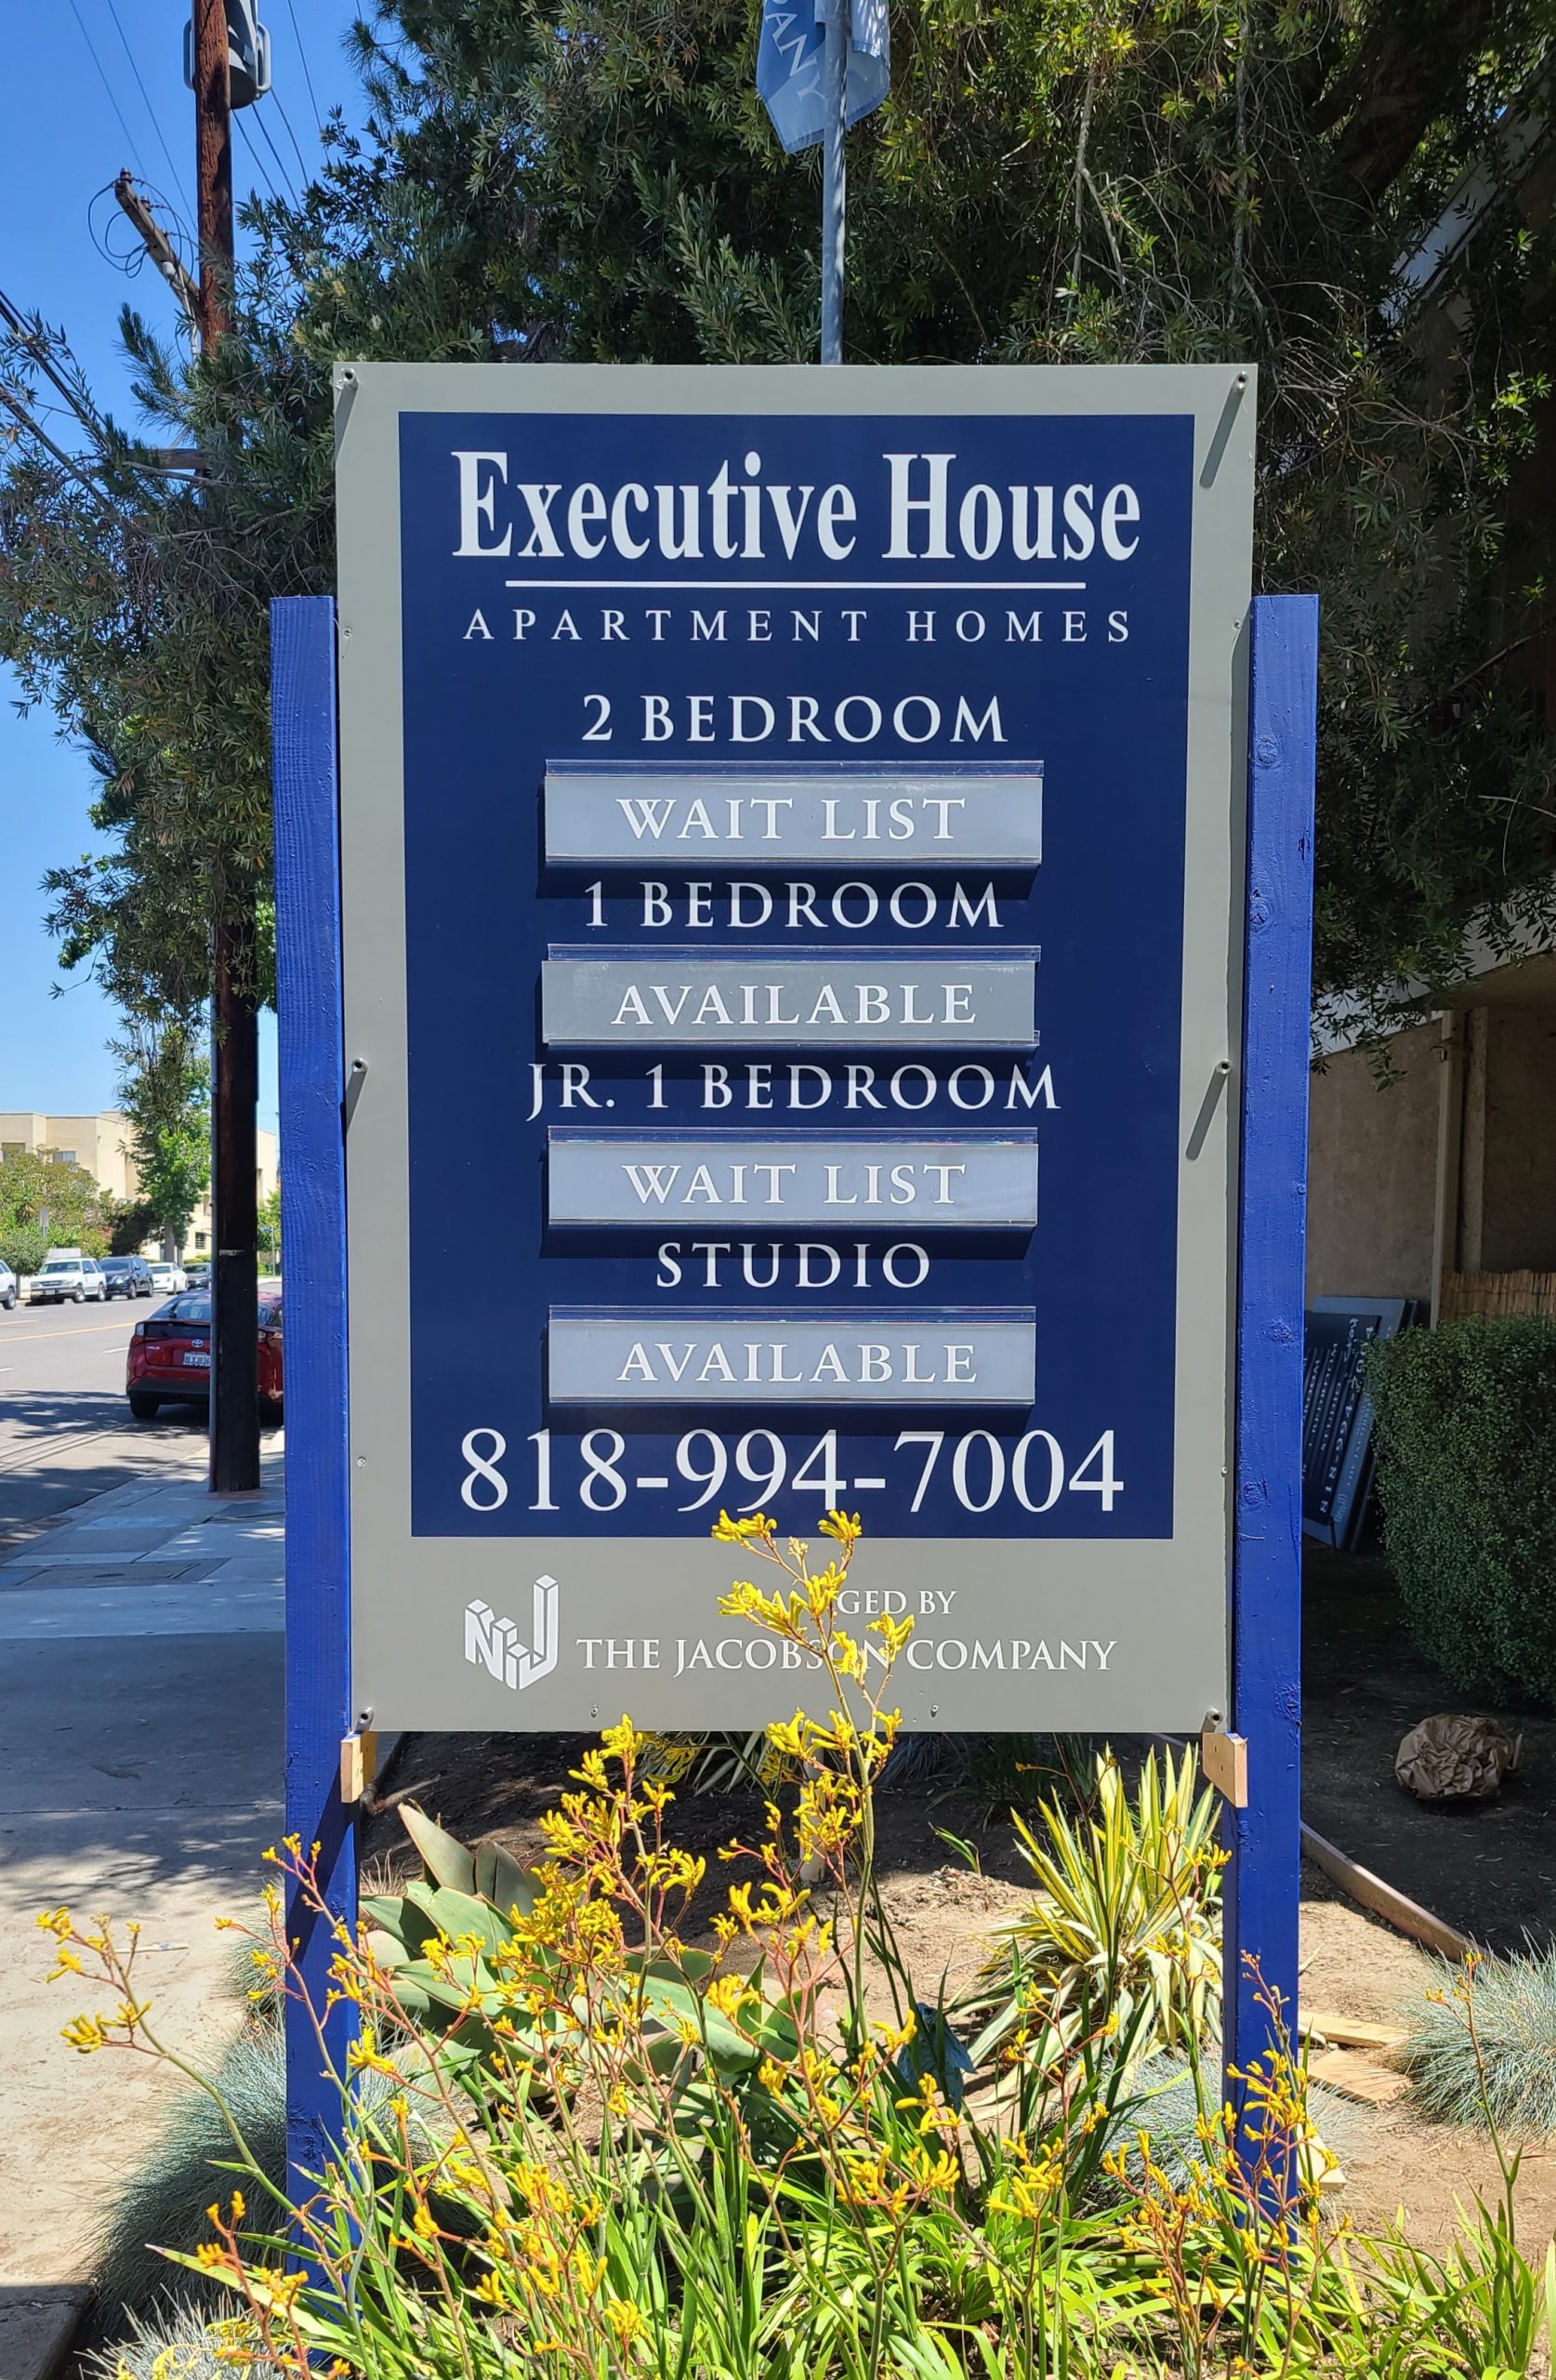 Part of our post and panel sign package for our friends in The Jacobson Company. This acrylic cover over the Van Nuys apartment sign protects it from vandalism.